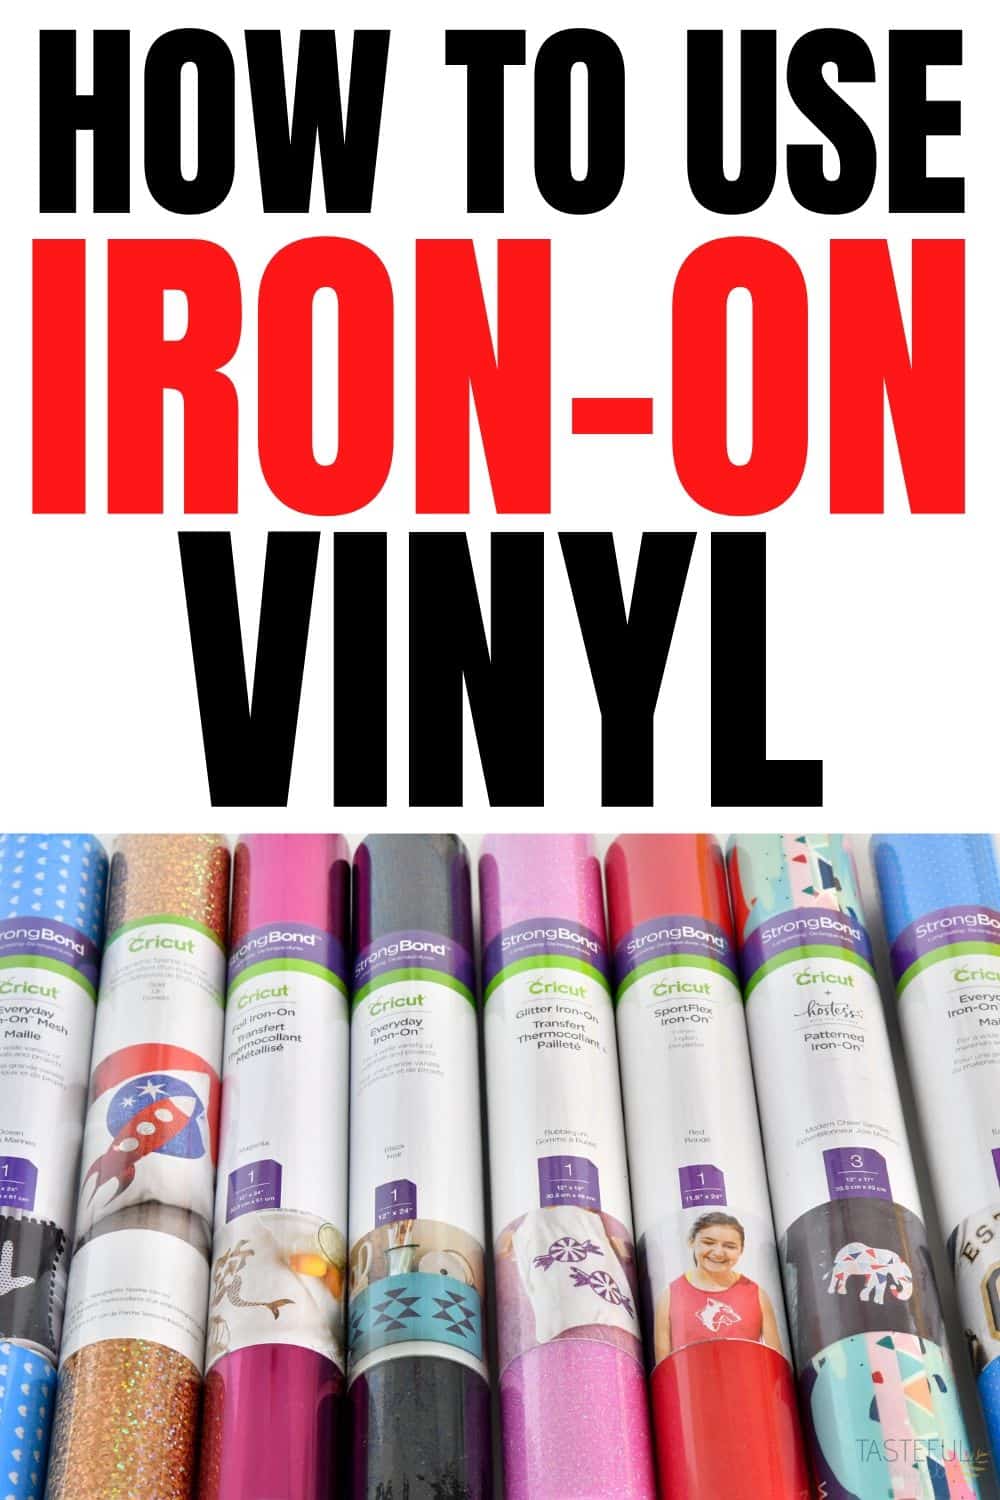 EVERYTHING you need to know about Iron-On Vinyl including types of HTV, what to use it on, how to use it and more!